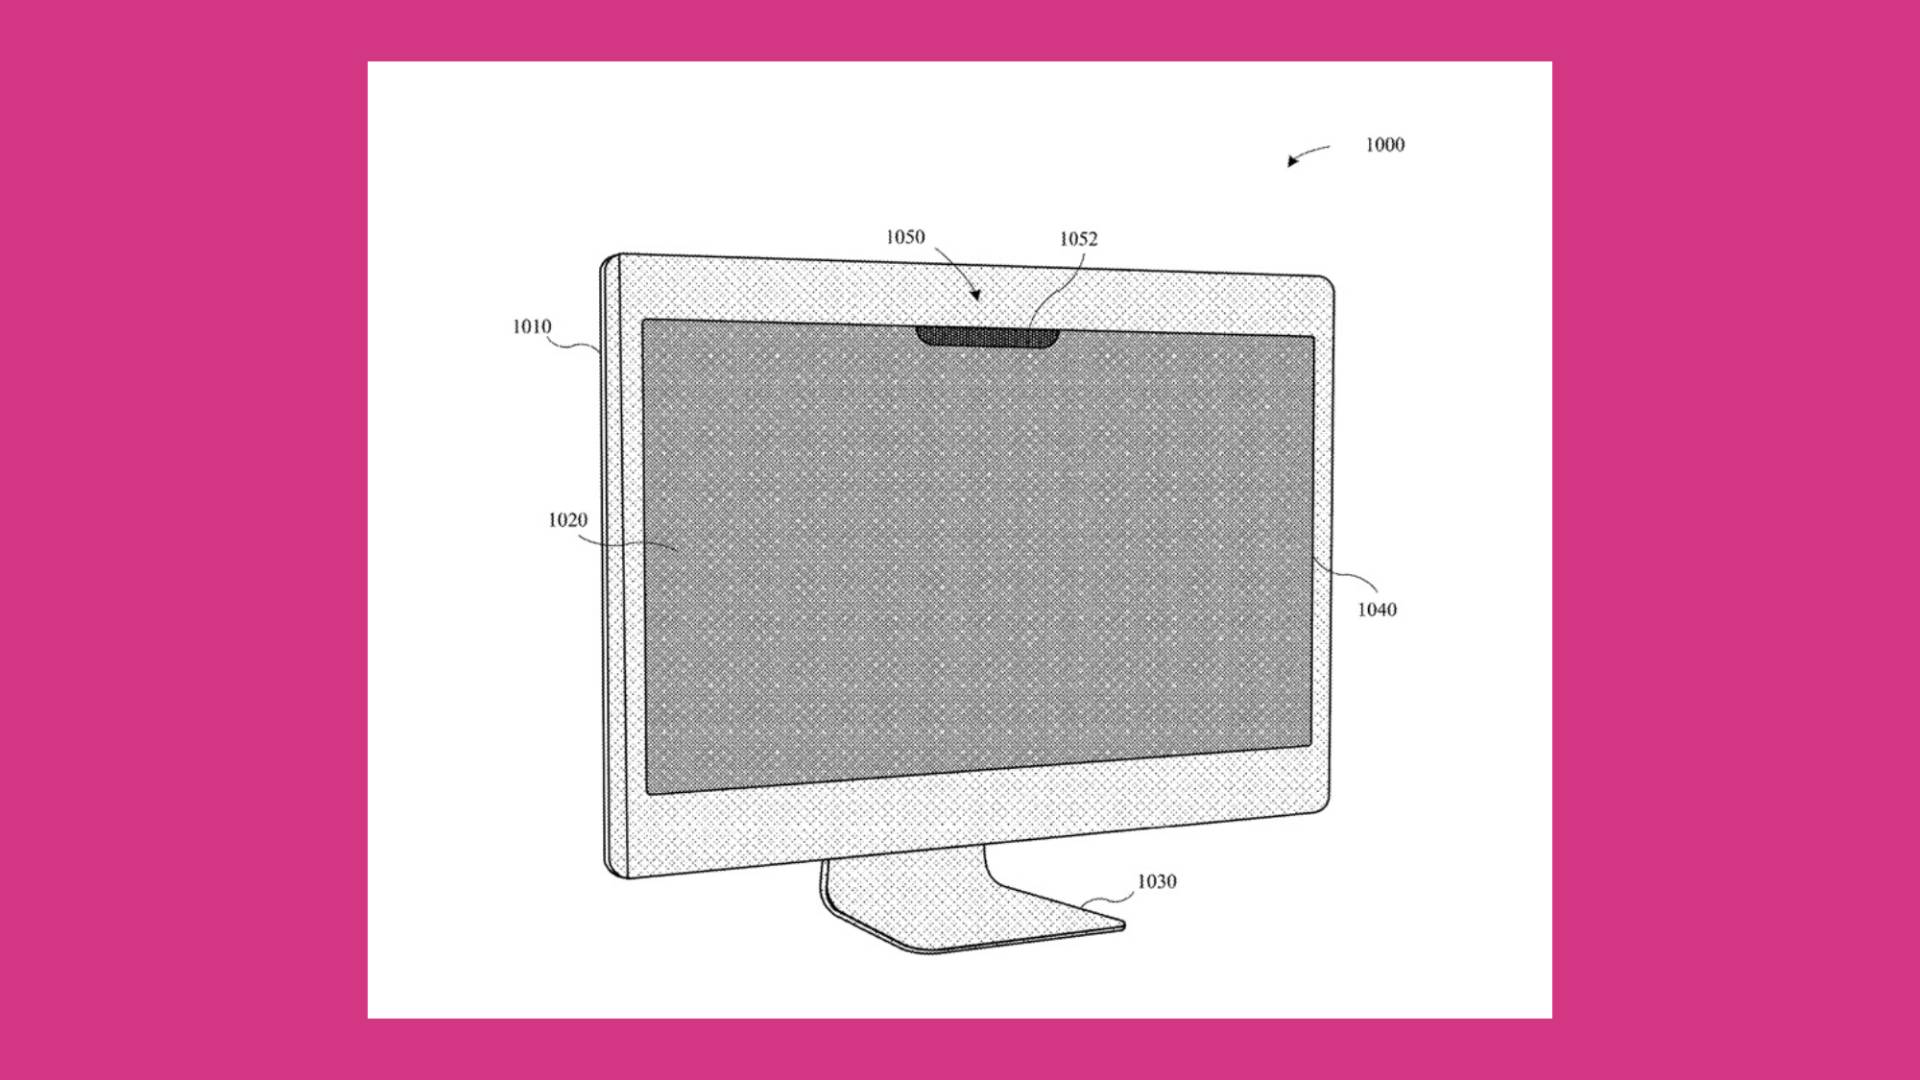 patent image for imac face id